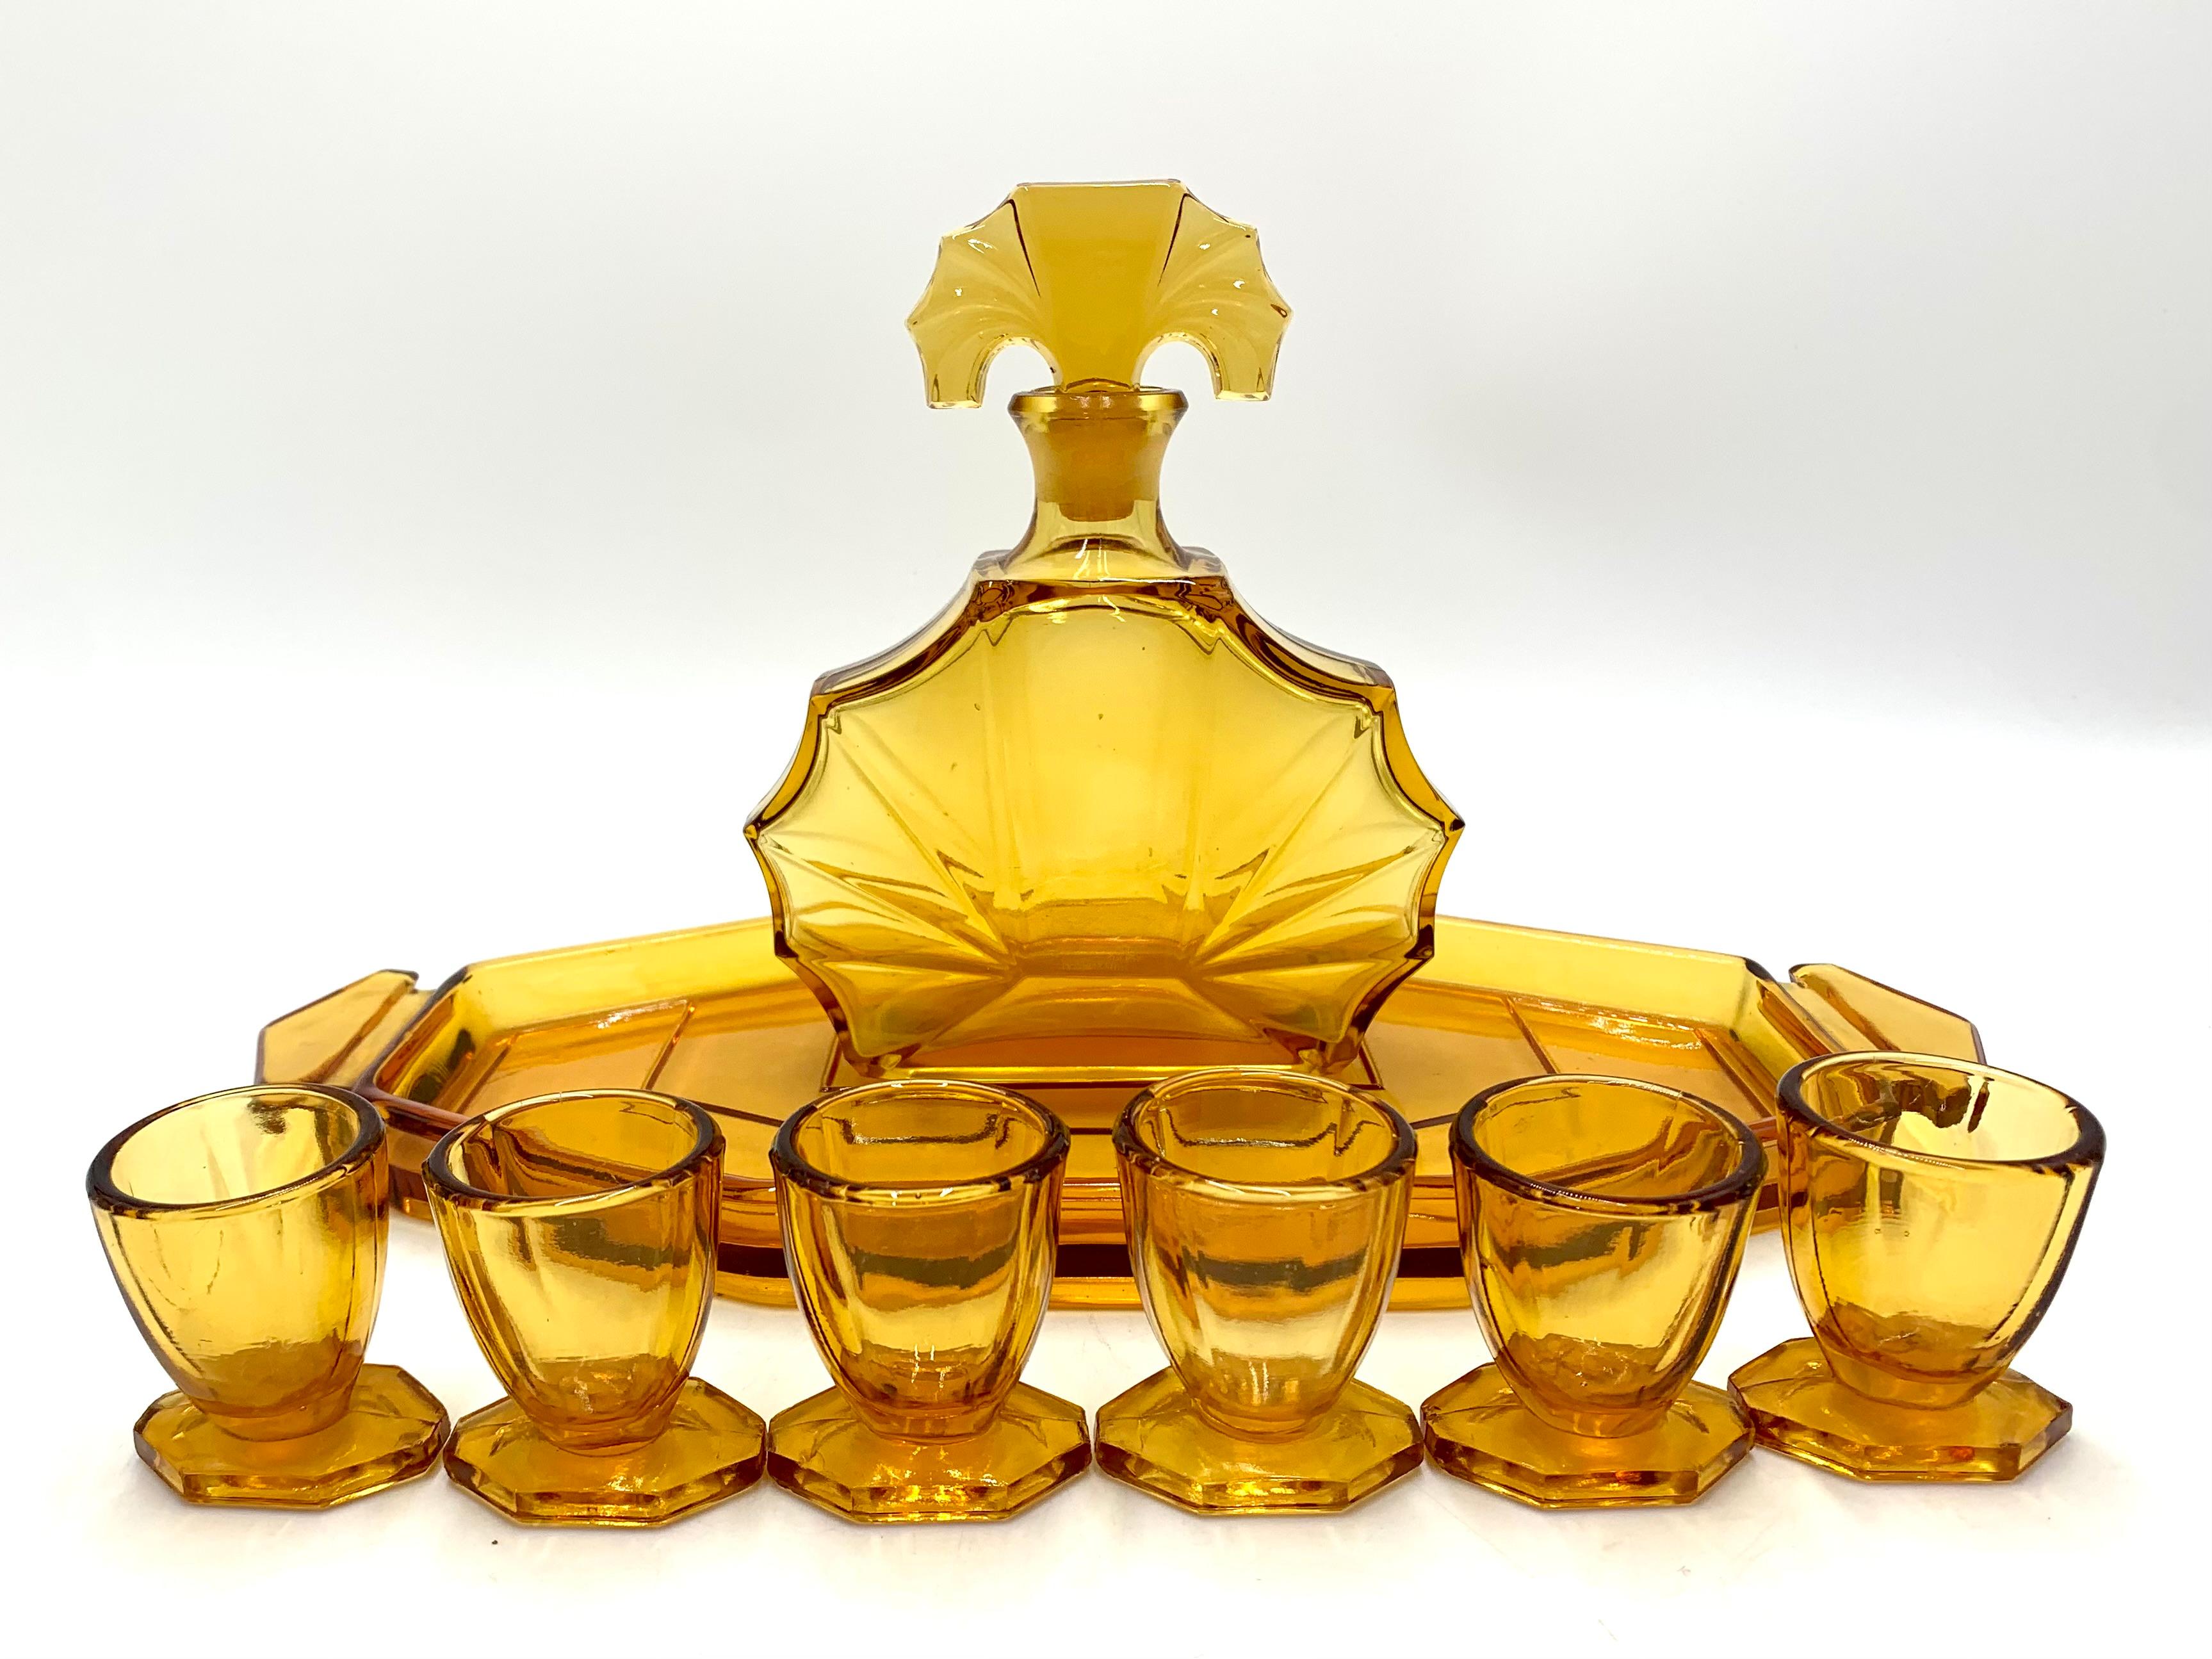 Amber glass liqueur set in the Art Deco style, consisting of a tray, a decanter and 6 glasses.

Produced in the Czech Republic by Huta Hermanova in the 1930s.

Very good condition, one glass has a broken stem on one side (shown in the